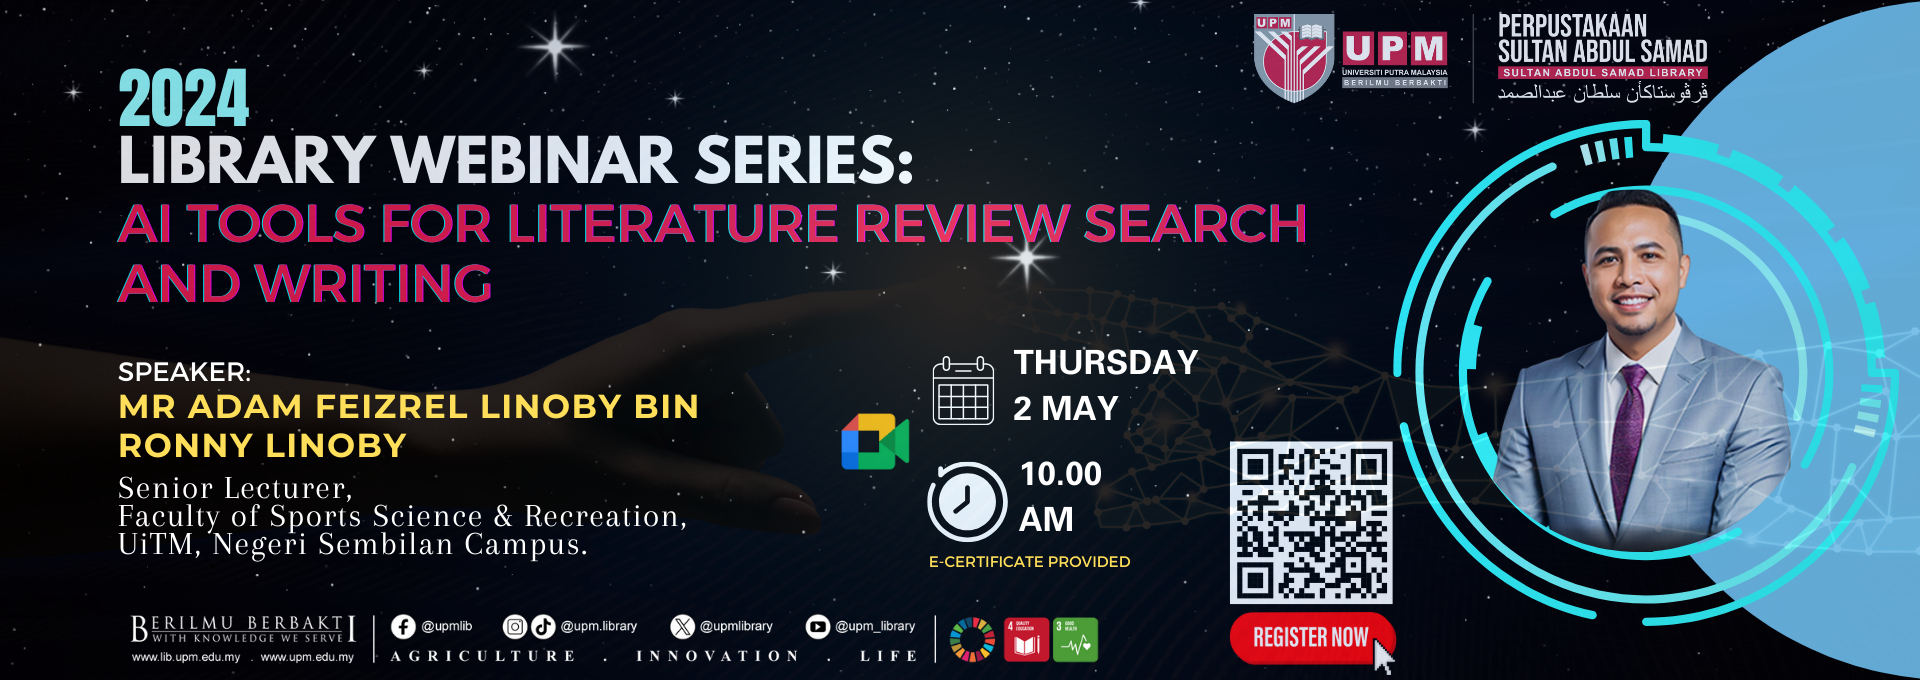 Invitation to a Webinar on AI Tools for Literature Review Search and Writing